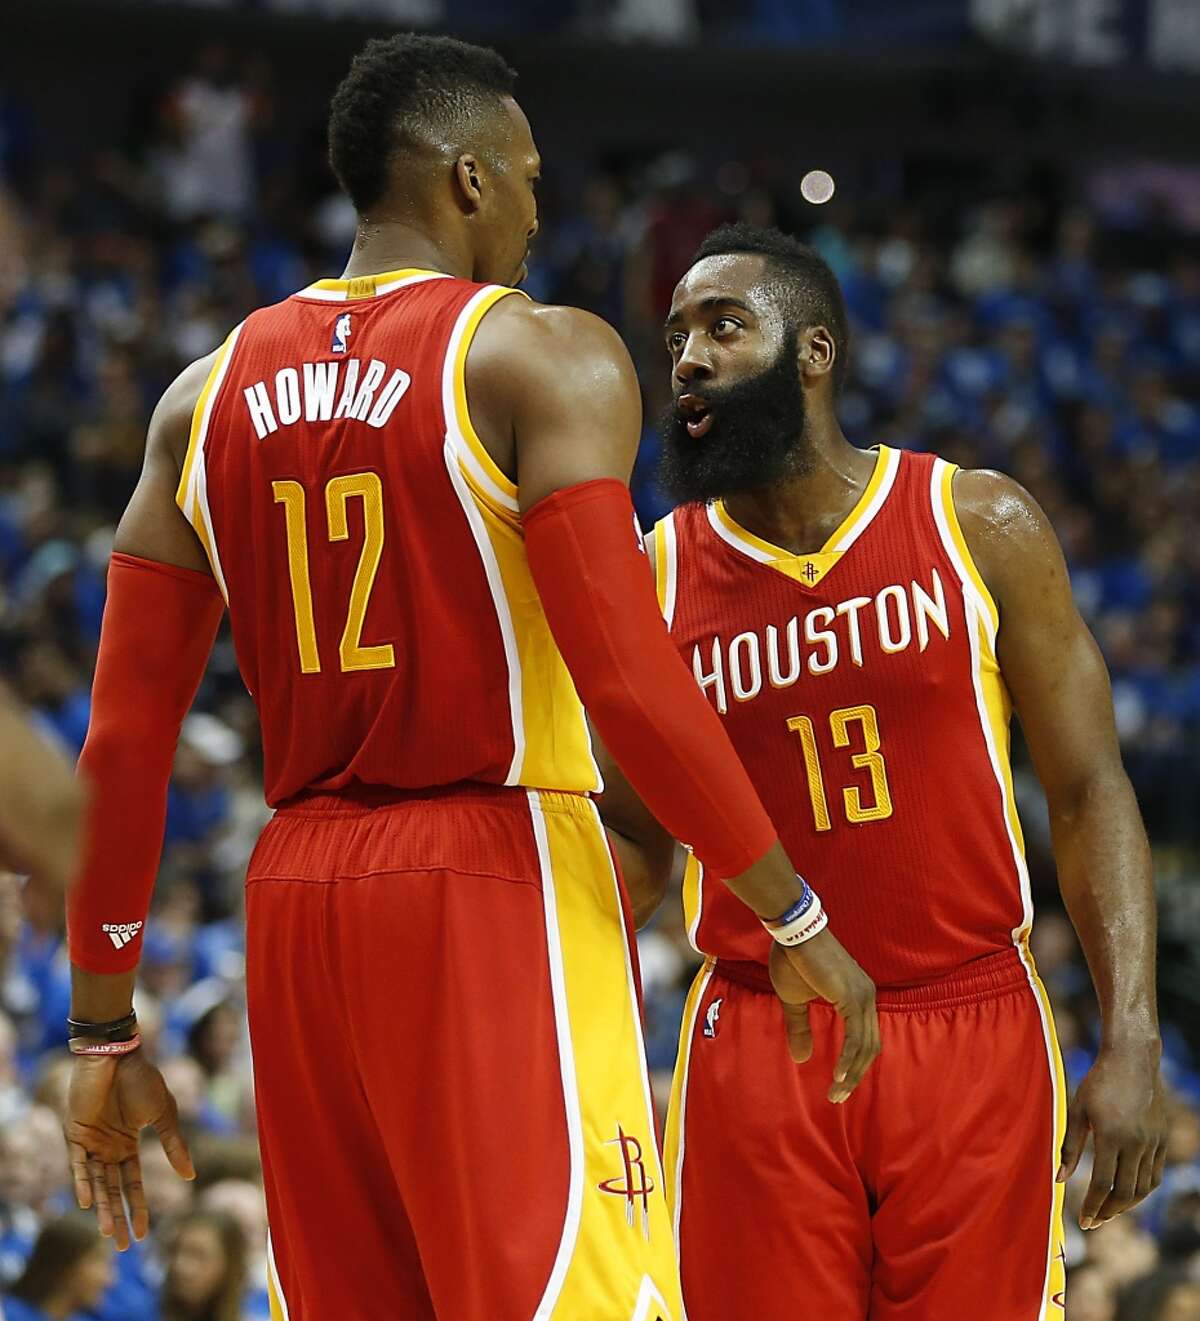 The Dwight Howard-James Harden union will continue, at least for a few more months, after Howard wasn't moved at Thursday's NBA trade deadline. Click through the gallery to see the most notable trades in Rockets history.